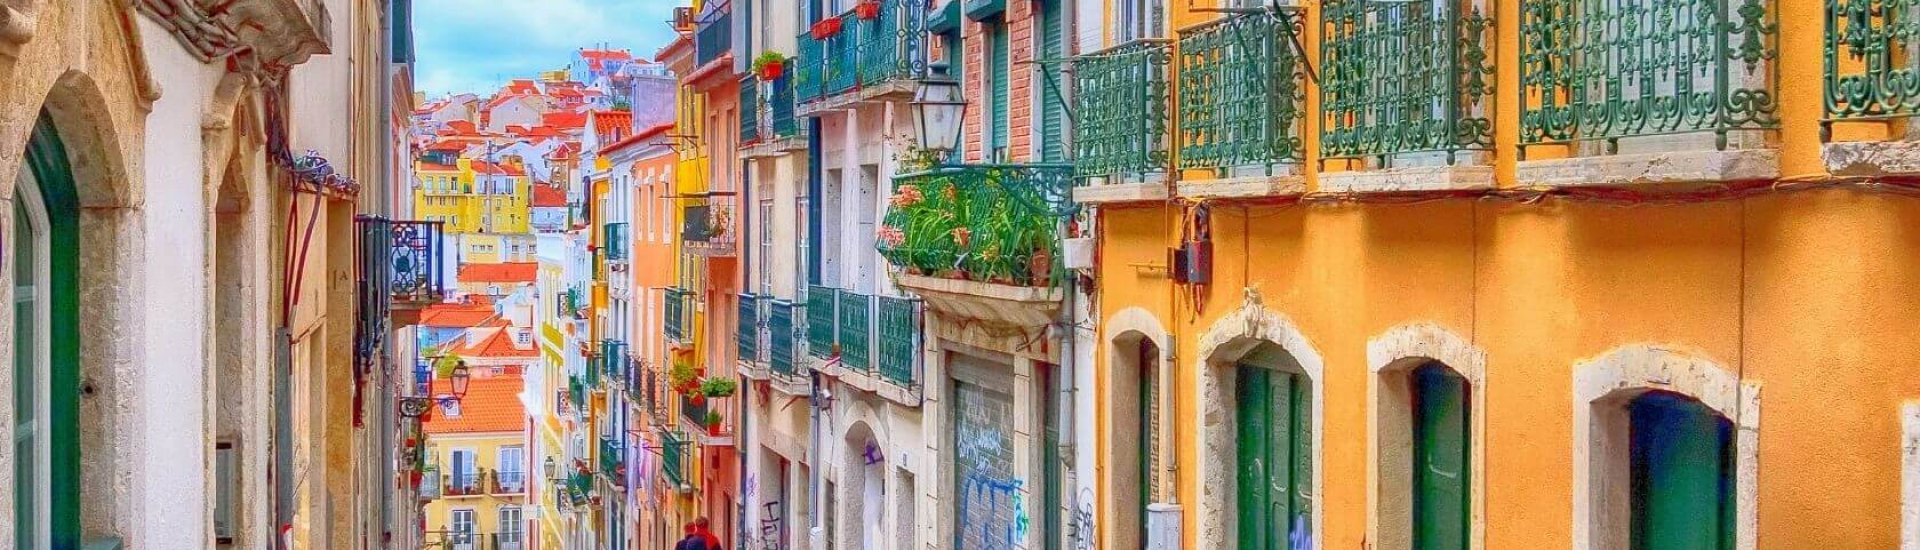 colourful streets of residential area in portugal